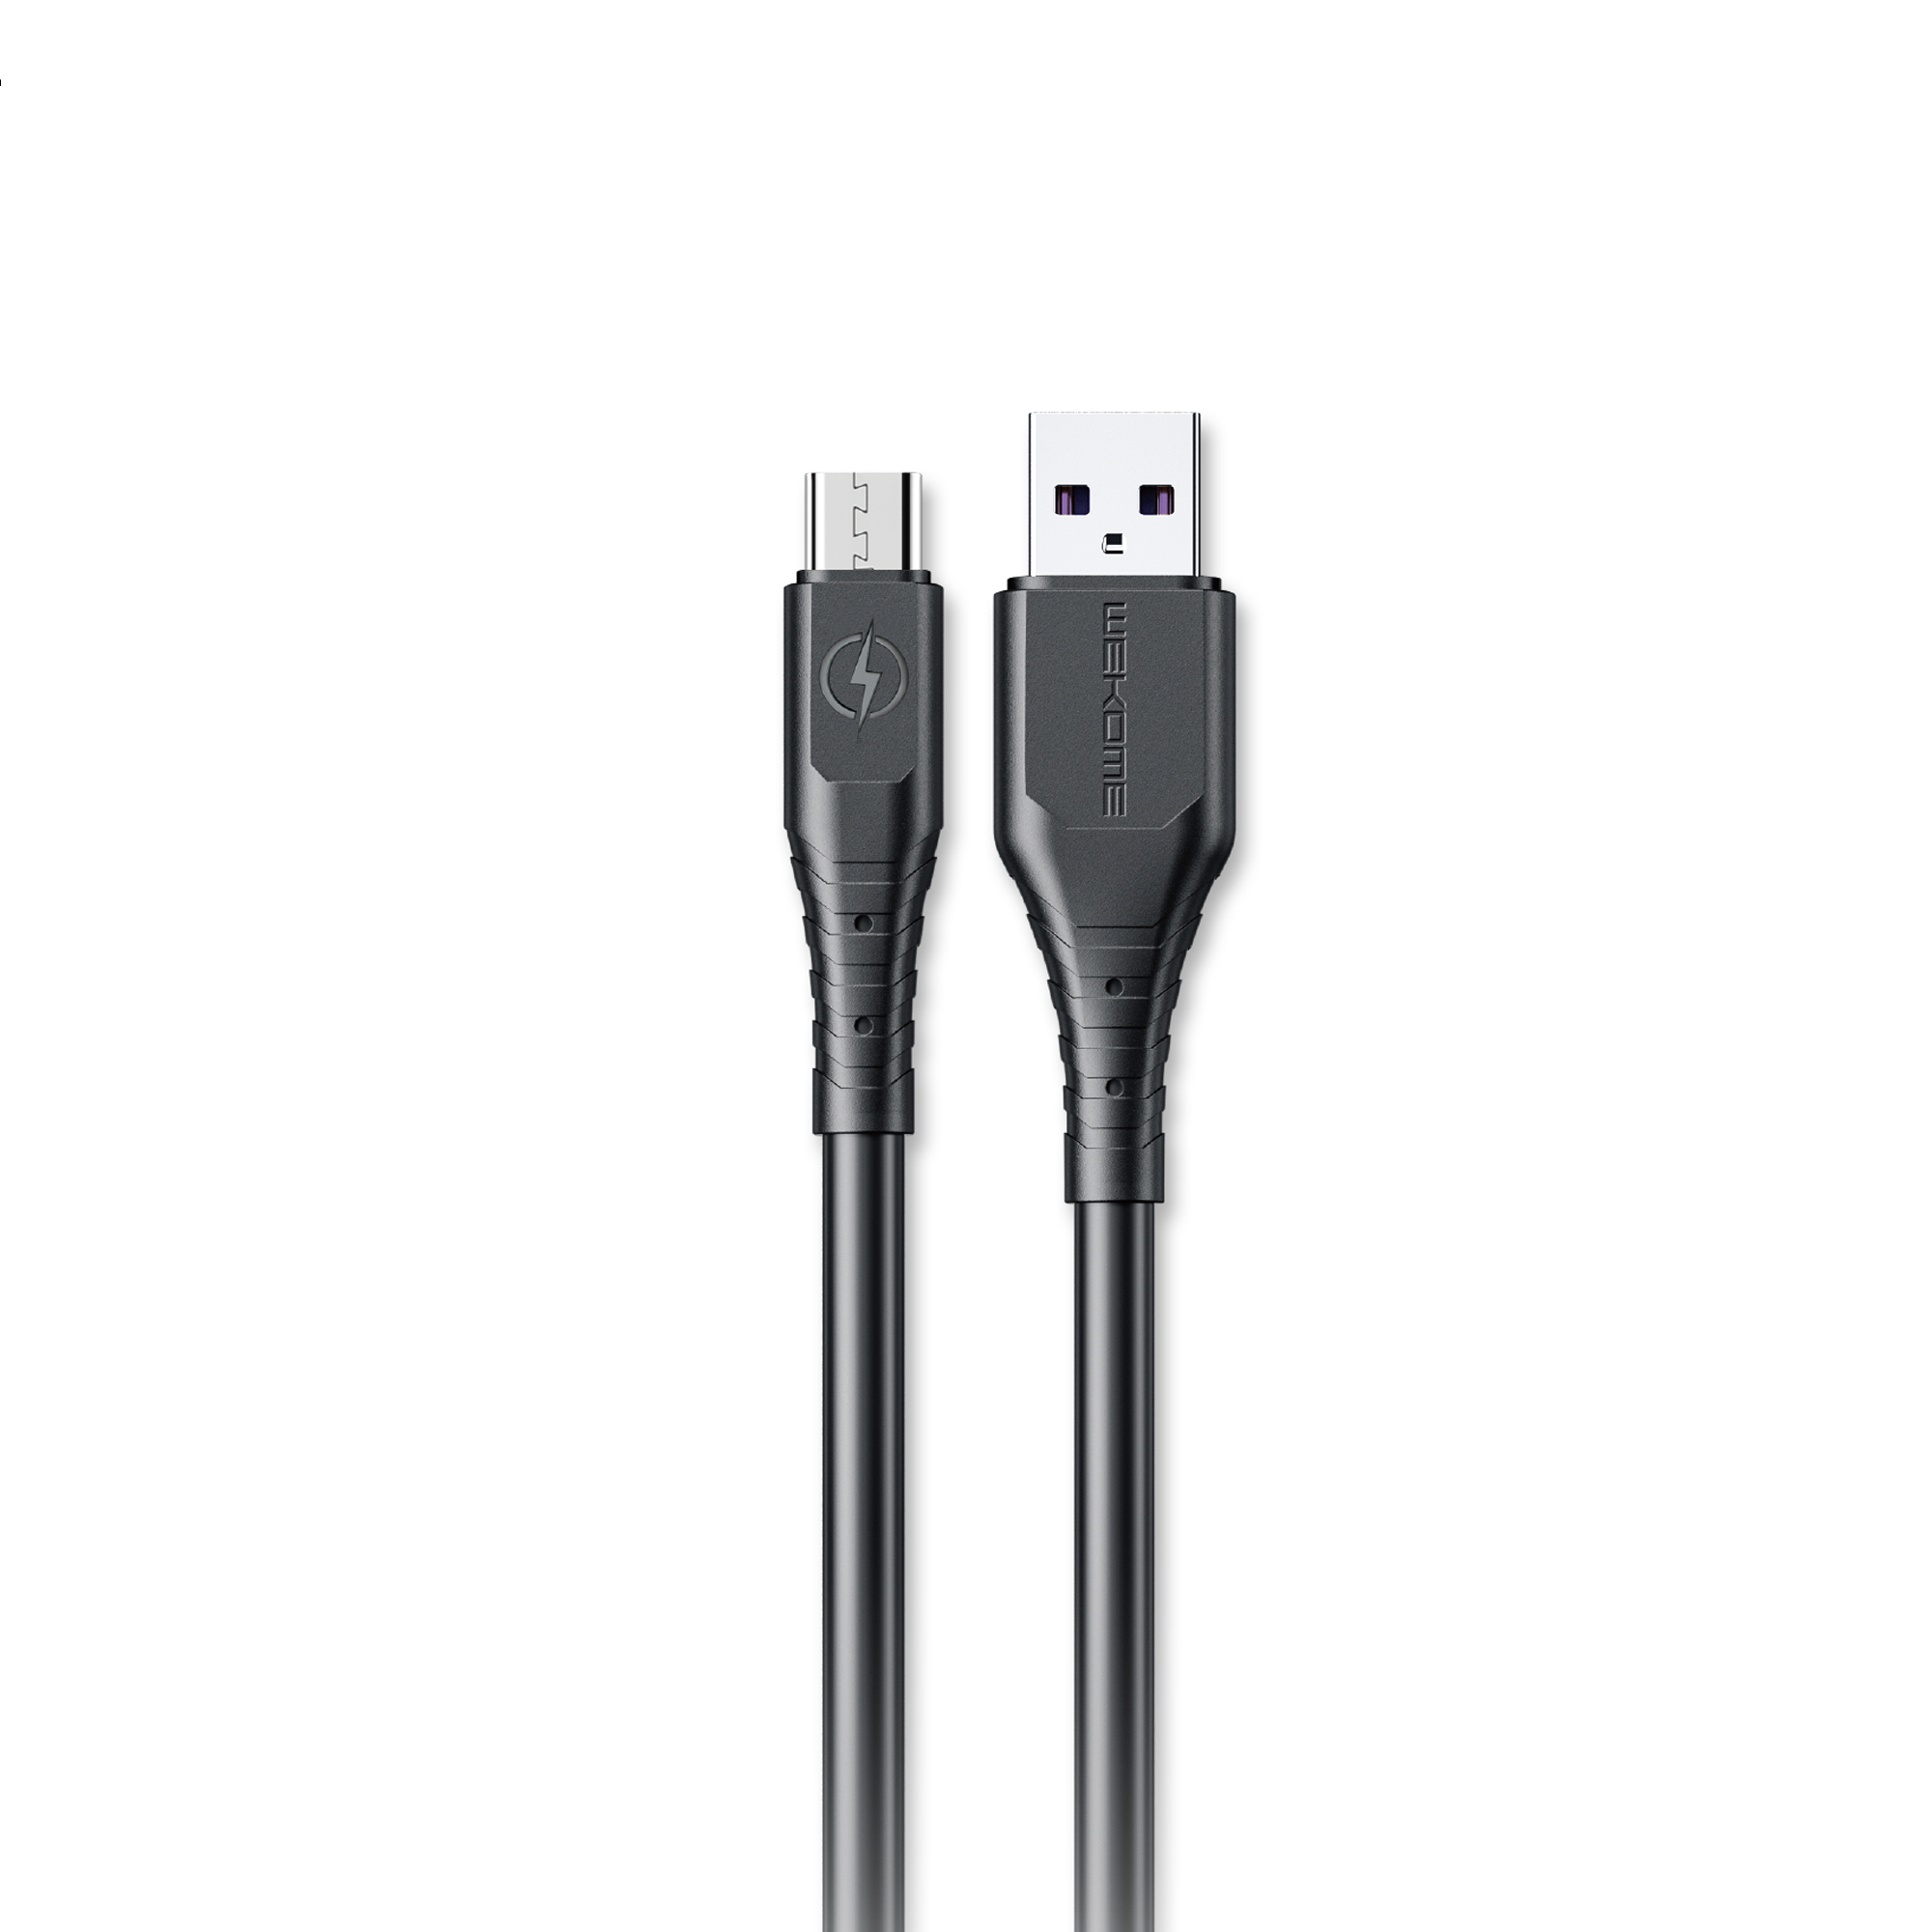 WEKOME Micro Cable WDC-152M WARGOD SERIES 6A SUPER FAST CHARGE DATA CABLE FOR MICRO (1M)(2M)(3M), Micro Cable, Android Cable, Charging Cable